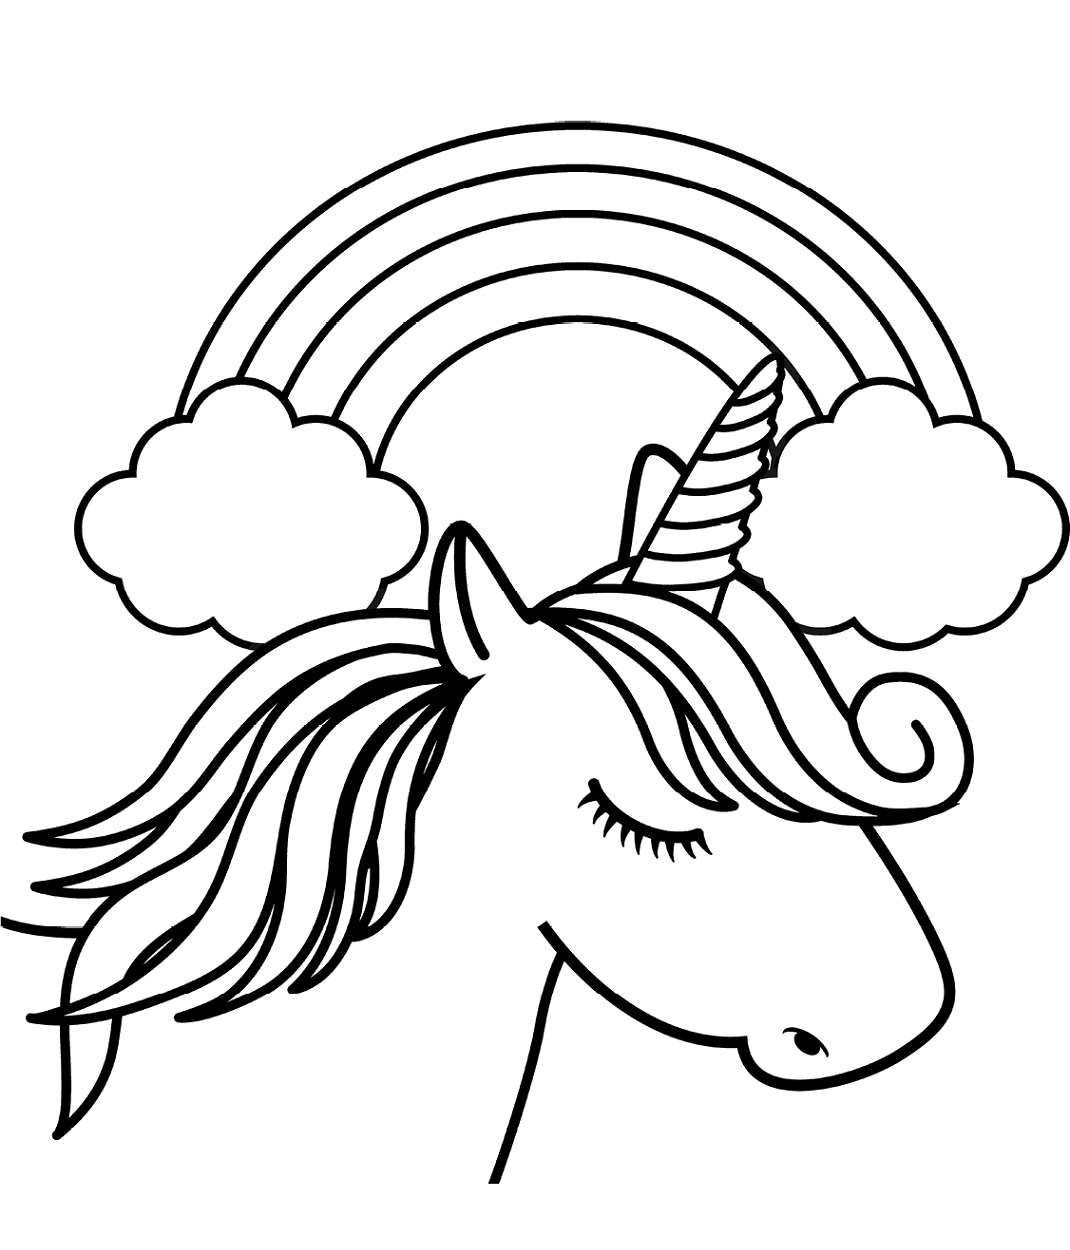 Coloring pages unicorn head in front of rainbow coloring page free printable awesomees to color